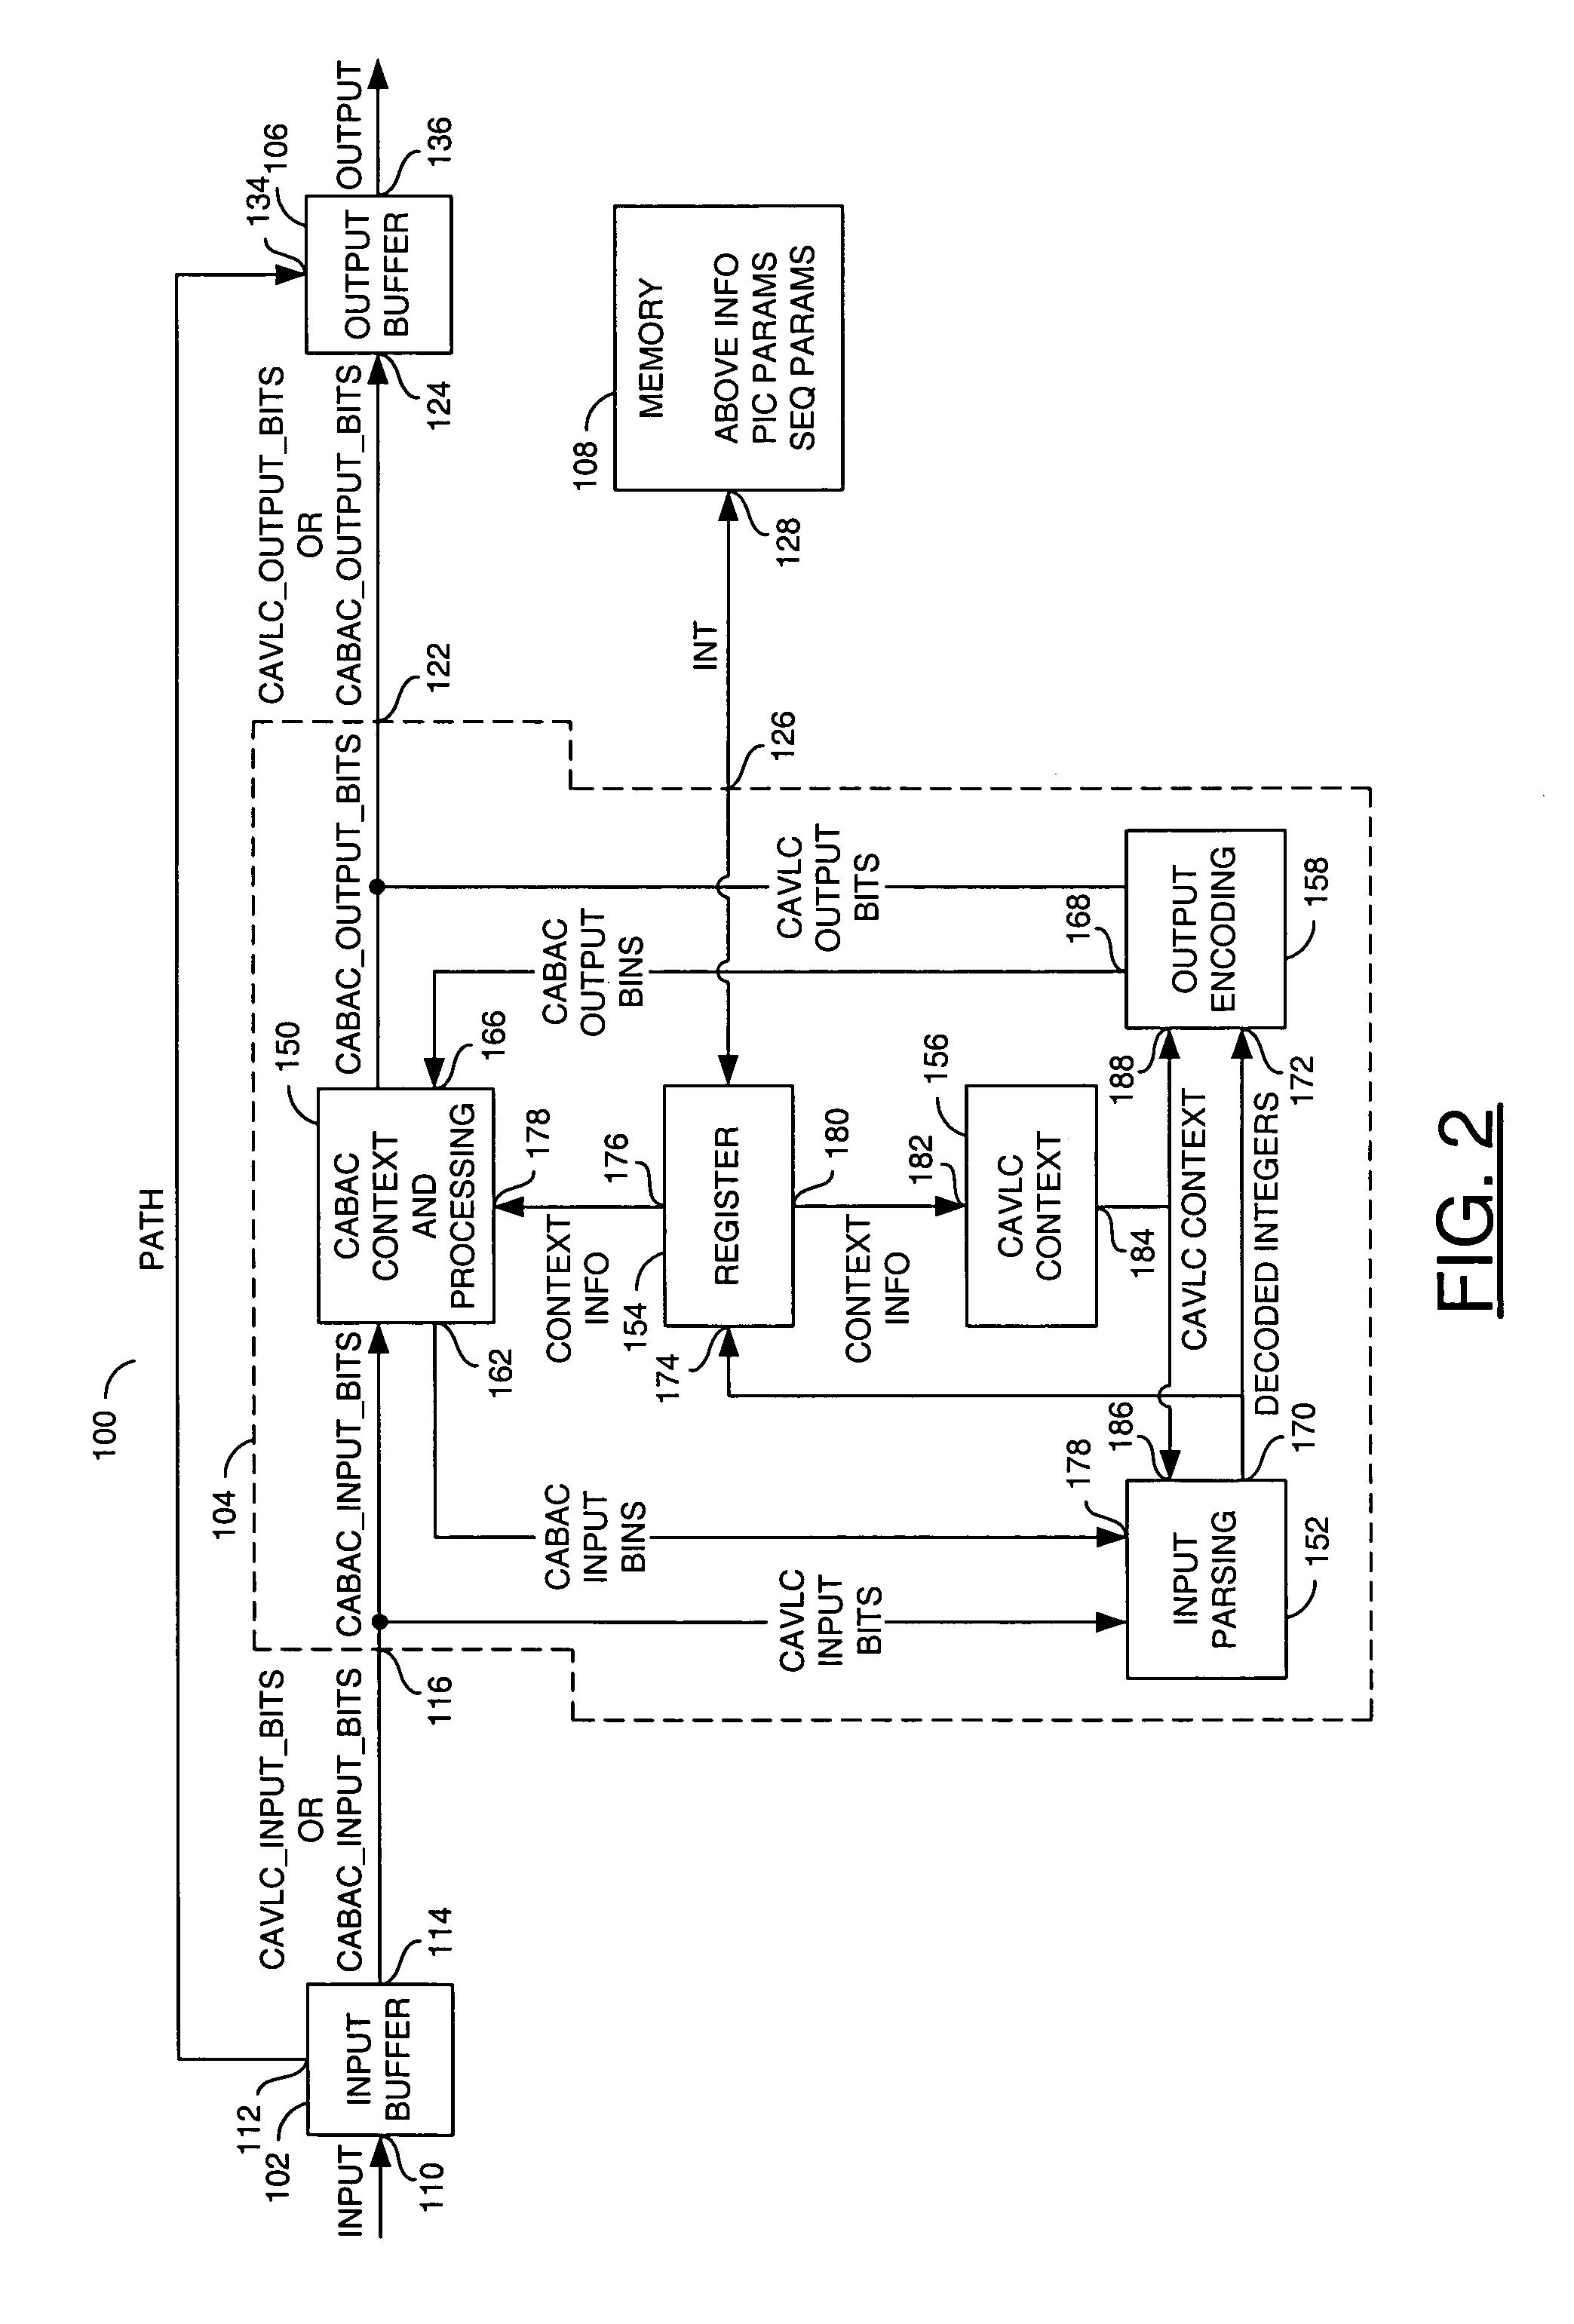 Method and/or apparatus for transcoding between H.264 CABAC and CAVLC entropy coding modes